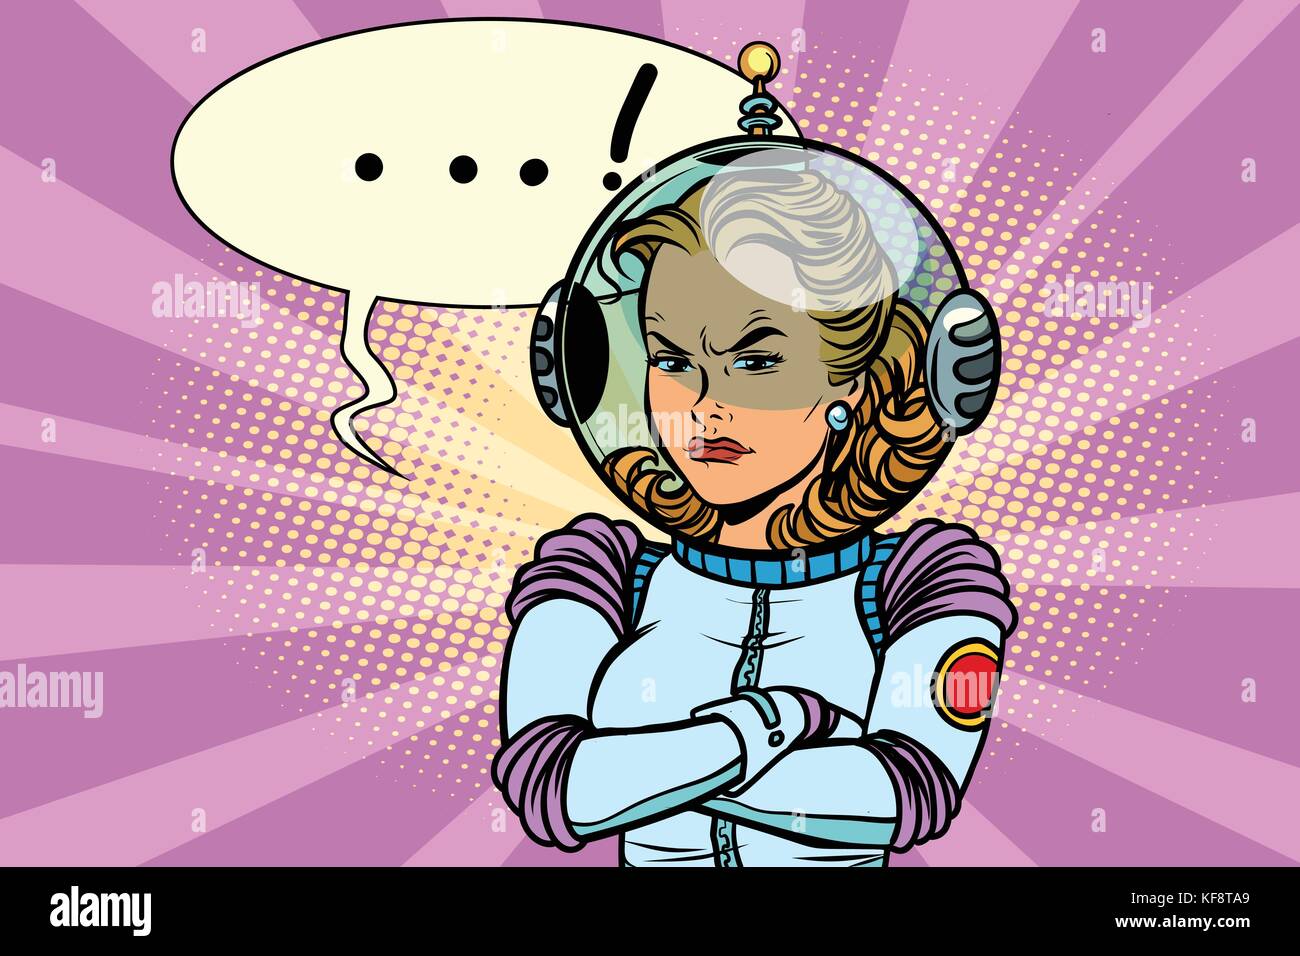 Comic illustration of angry woman astronaut Stock Vector